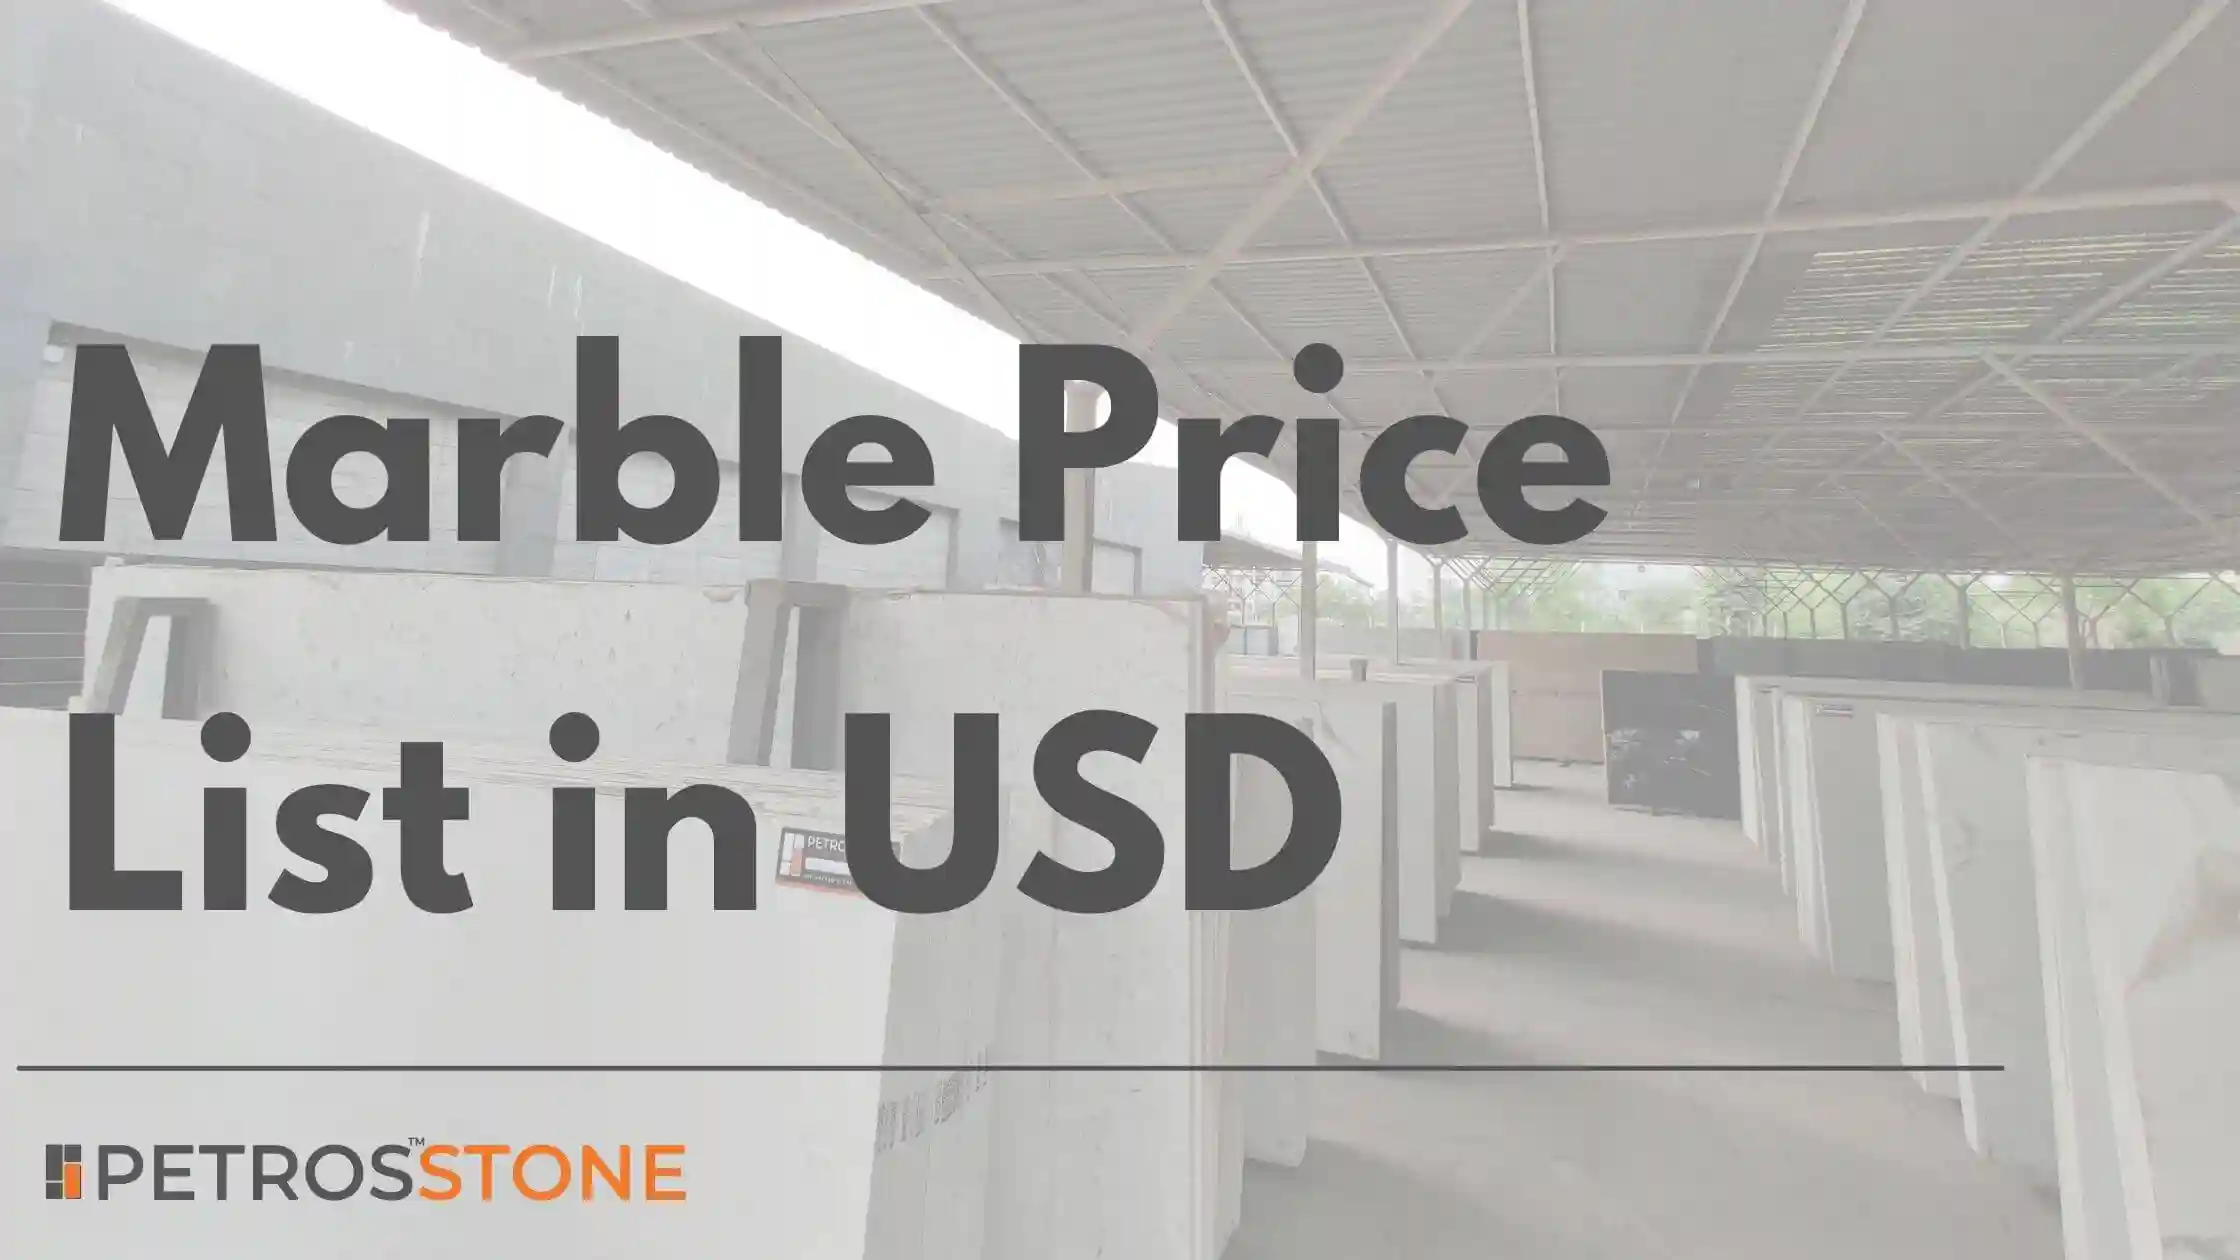 Marble-price-list-in-usd